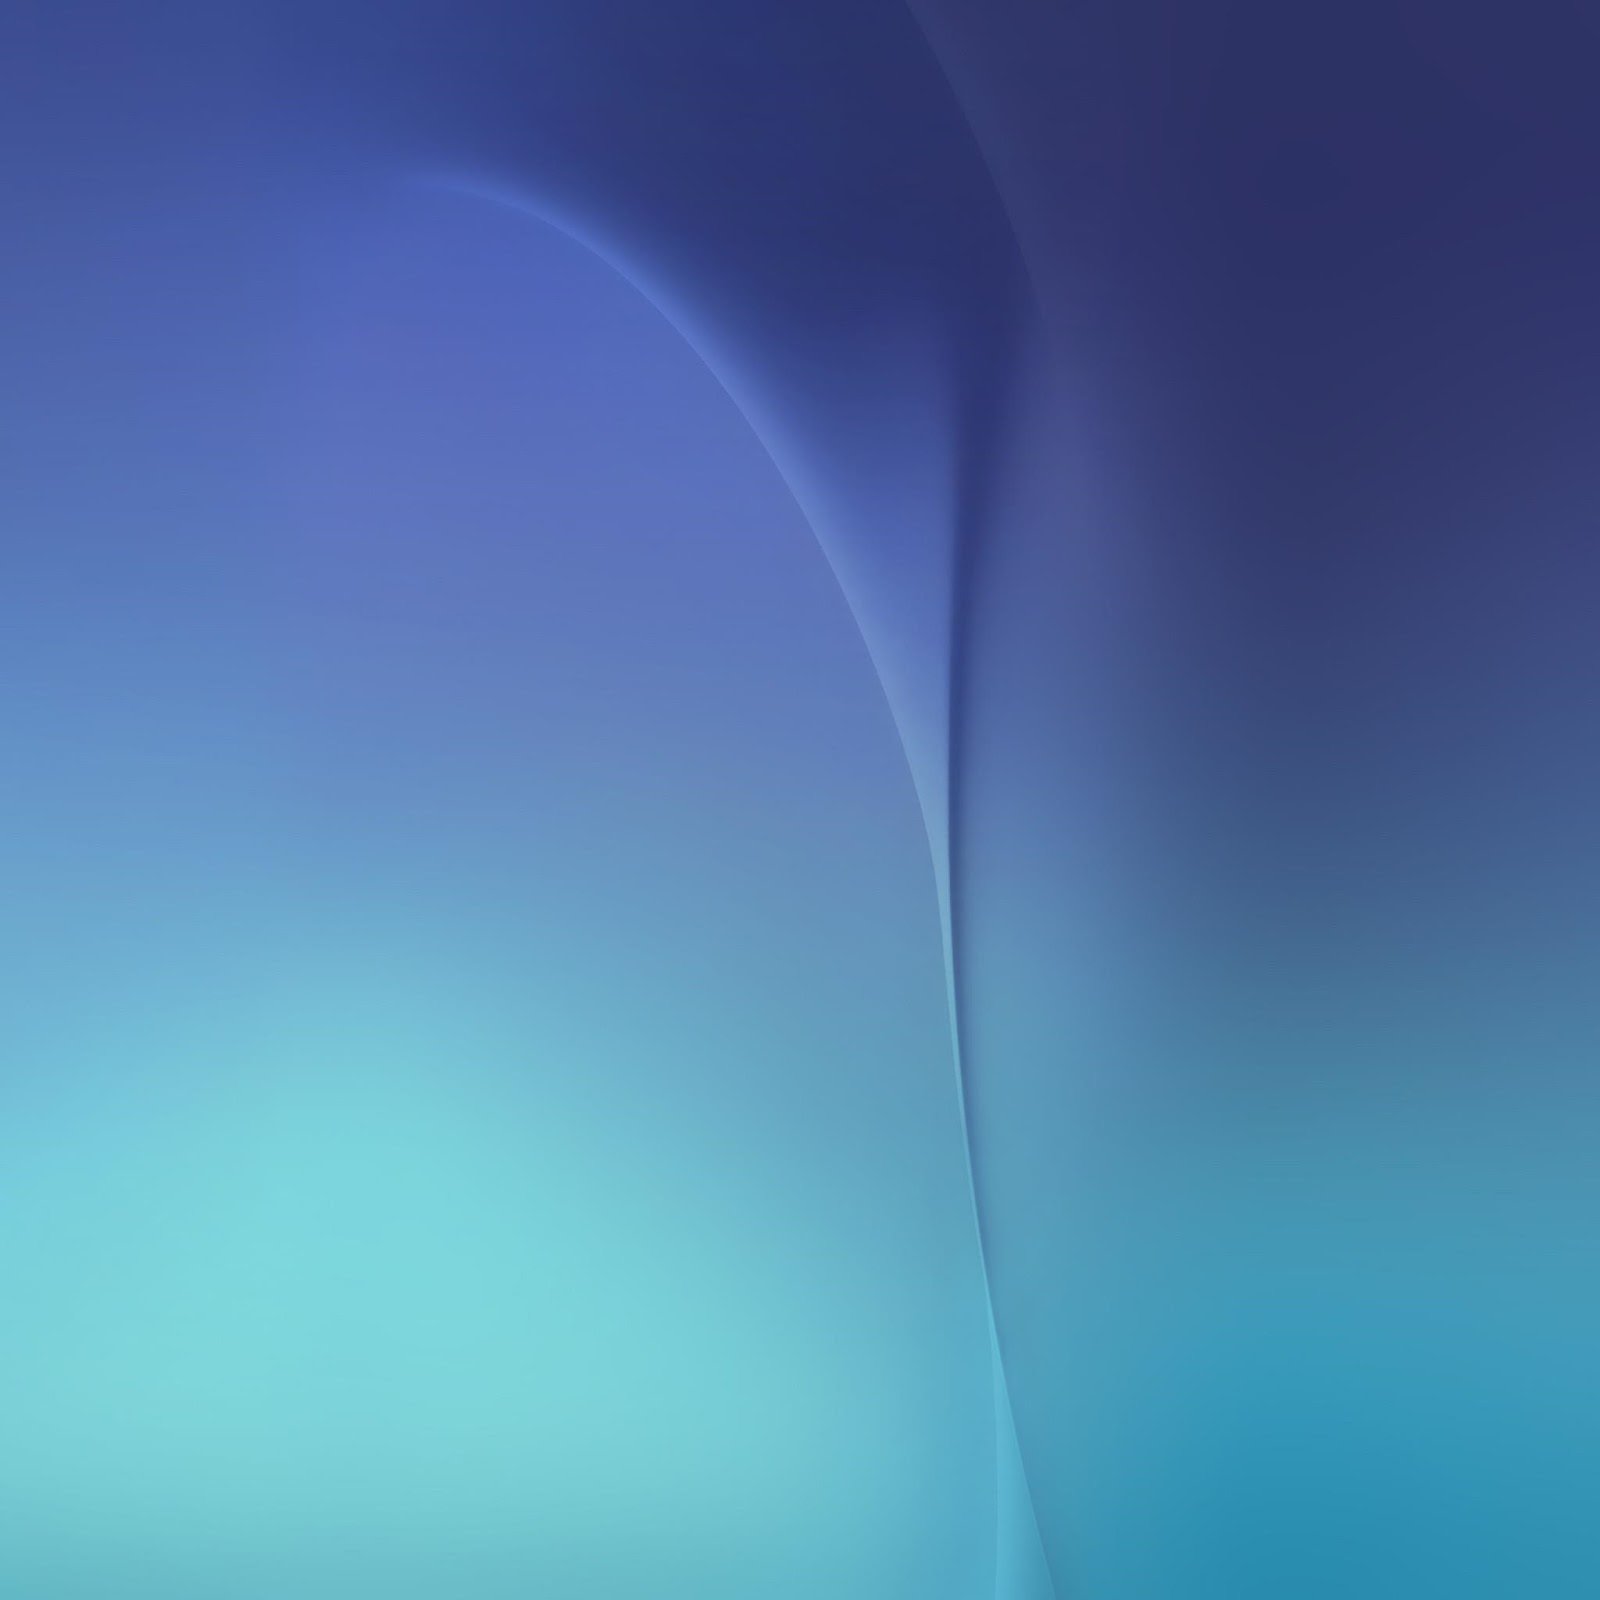 Default Samsung Galaxy S6 and S6 Edge Wallpaper Are Here, Download Now